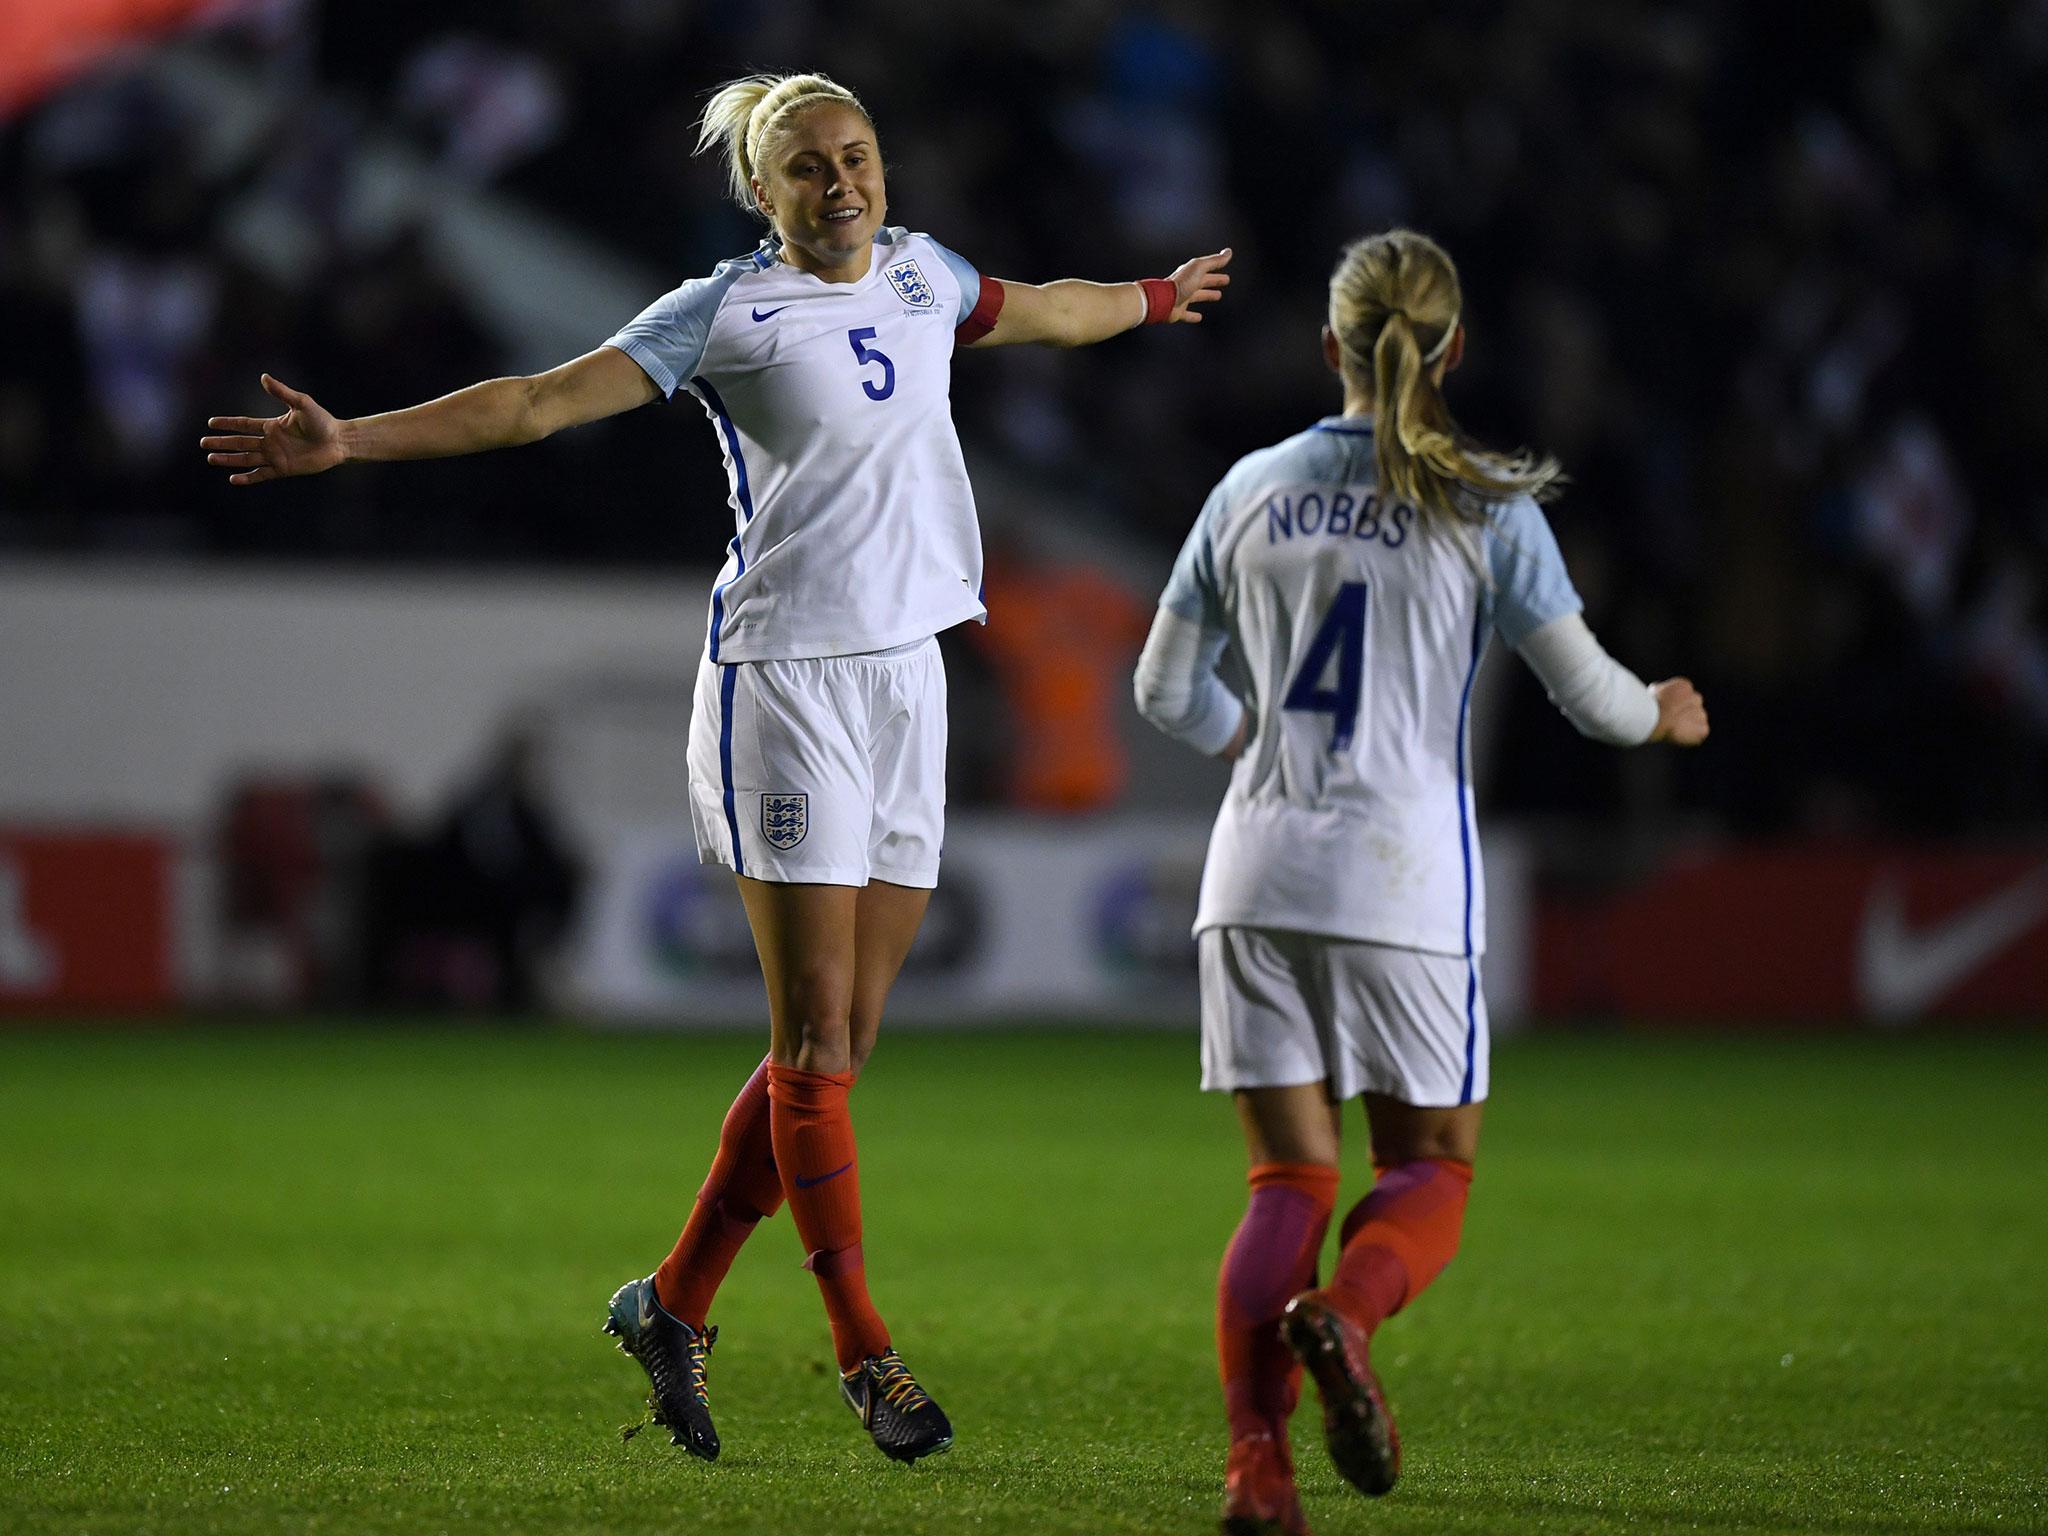 Steph Houghton will remain as captain